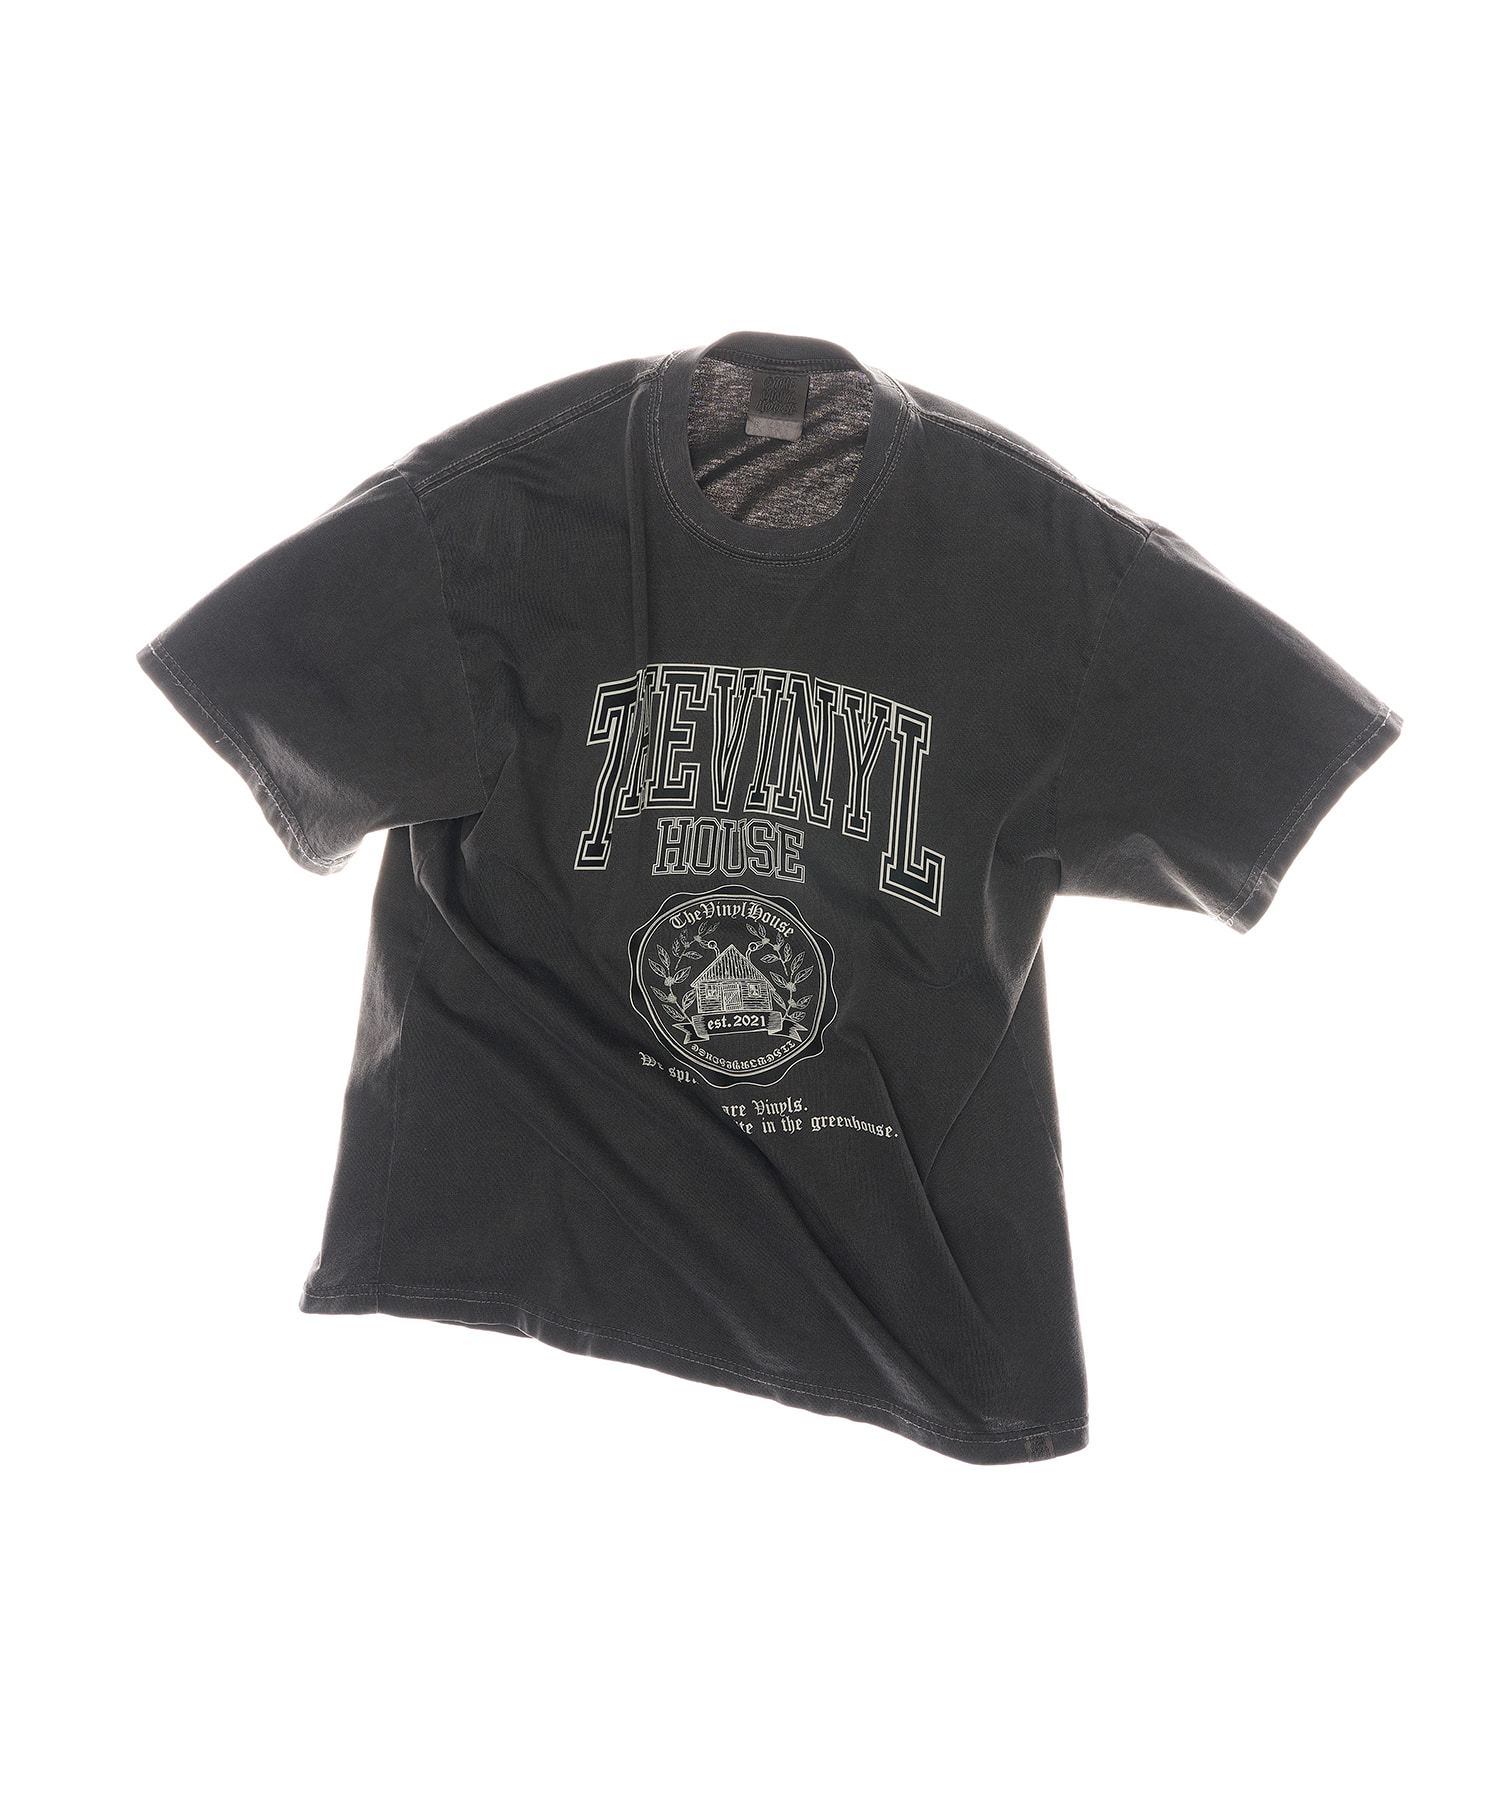 PIGMENT HOUSE COLLEGE TEE CHARCOAL